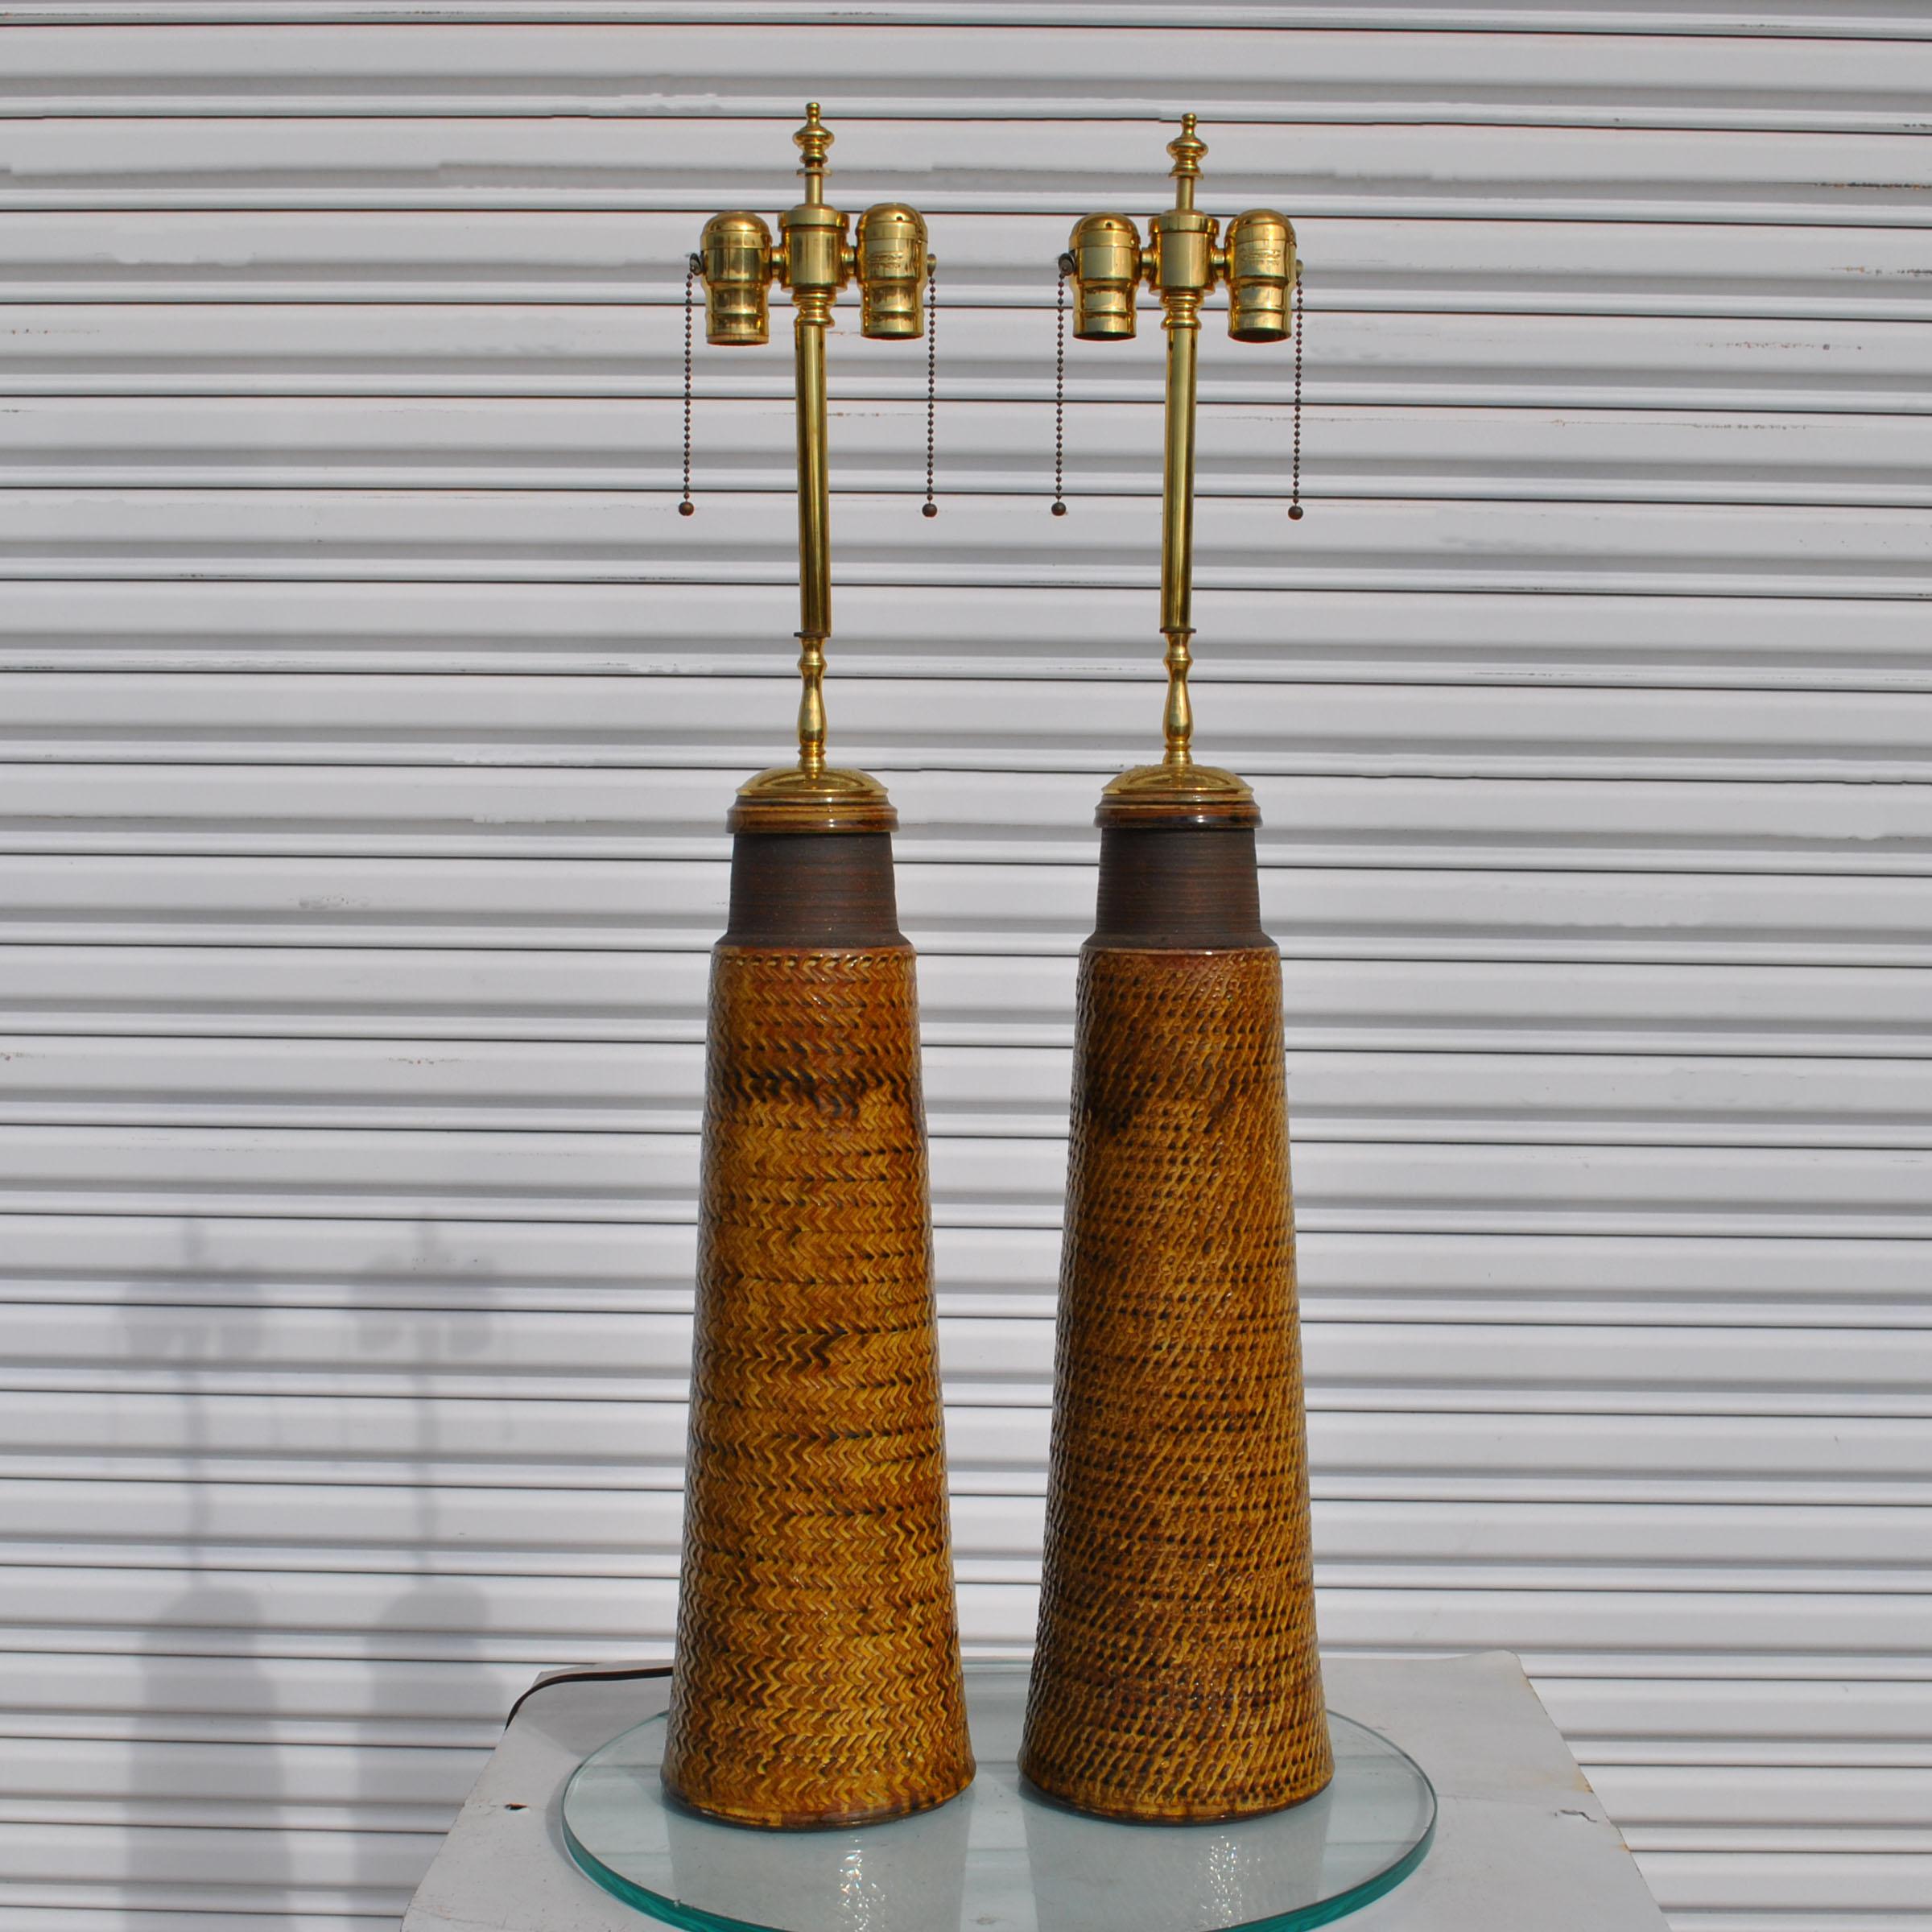 A pair of mid century modern ceramic table lamps featuring a surface with a woven design.  Newly rewired and restored.